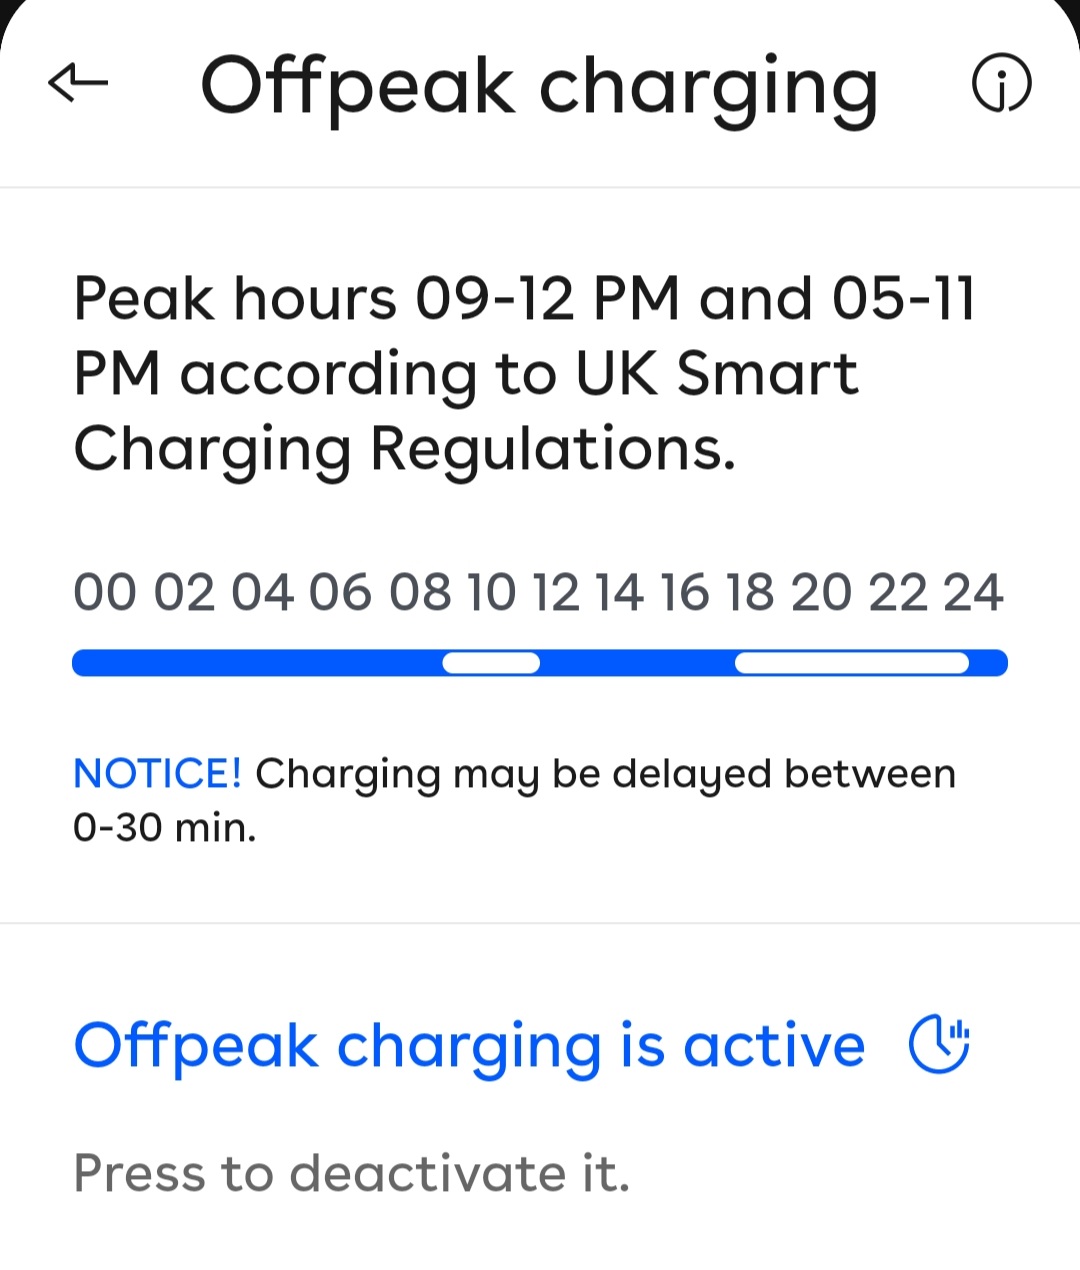 The offpeak charging tab has a horizontal bar broken into hours, with each hour colored blue or white.